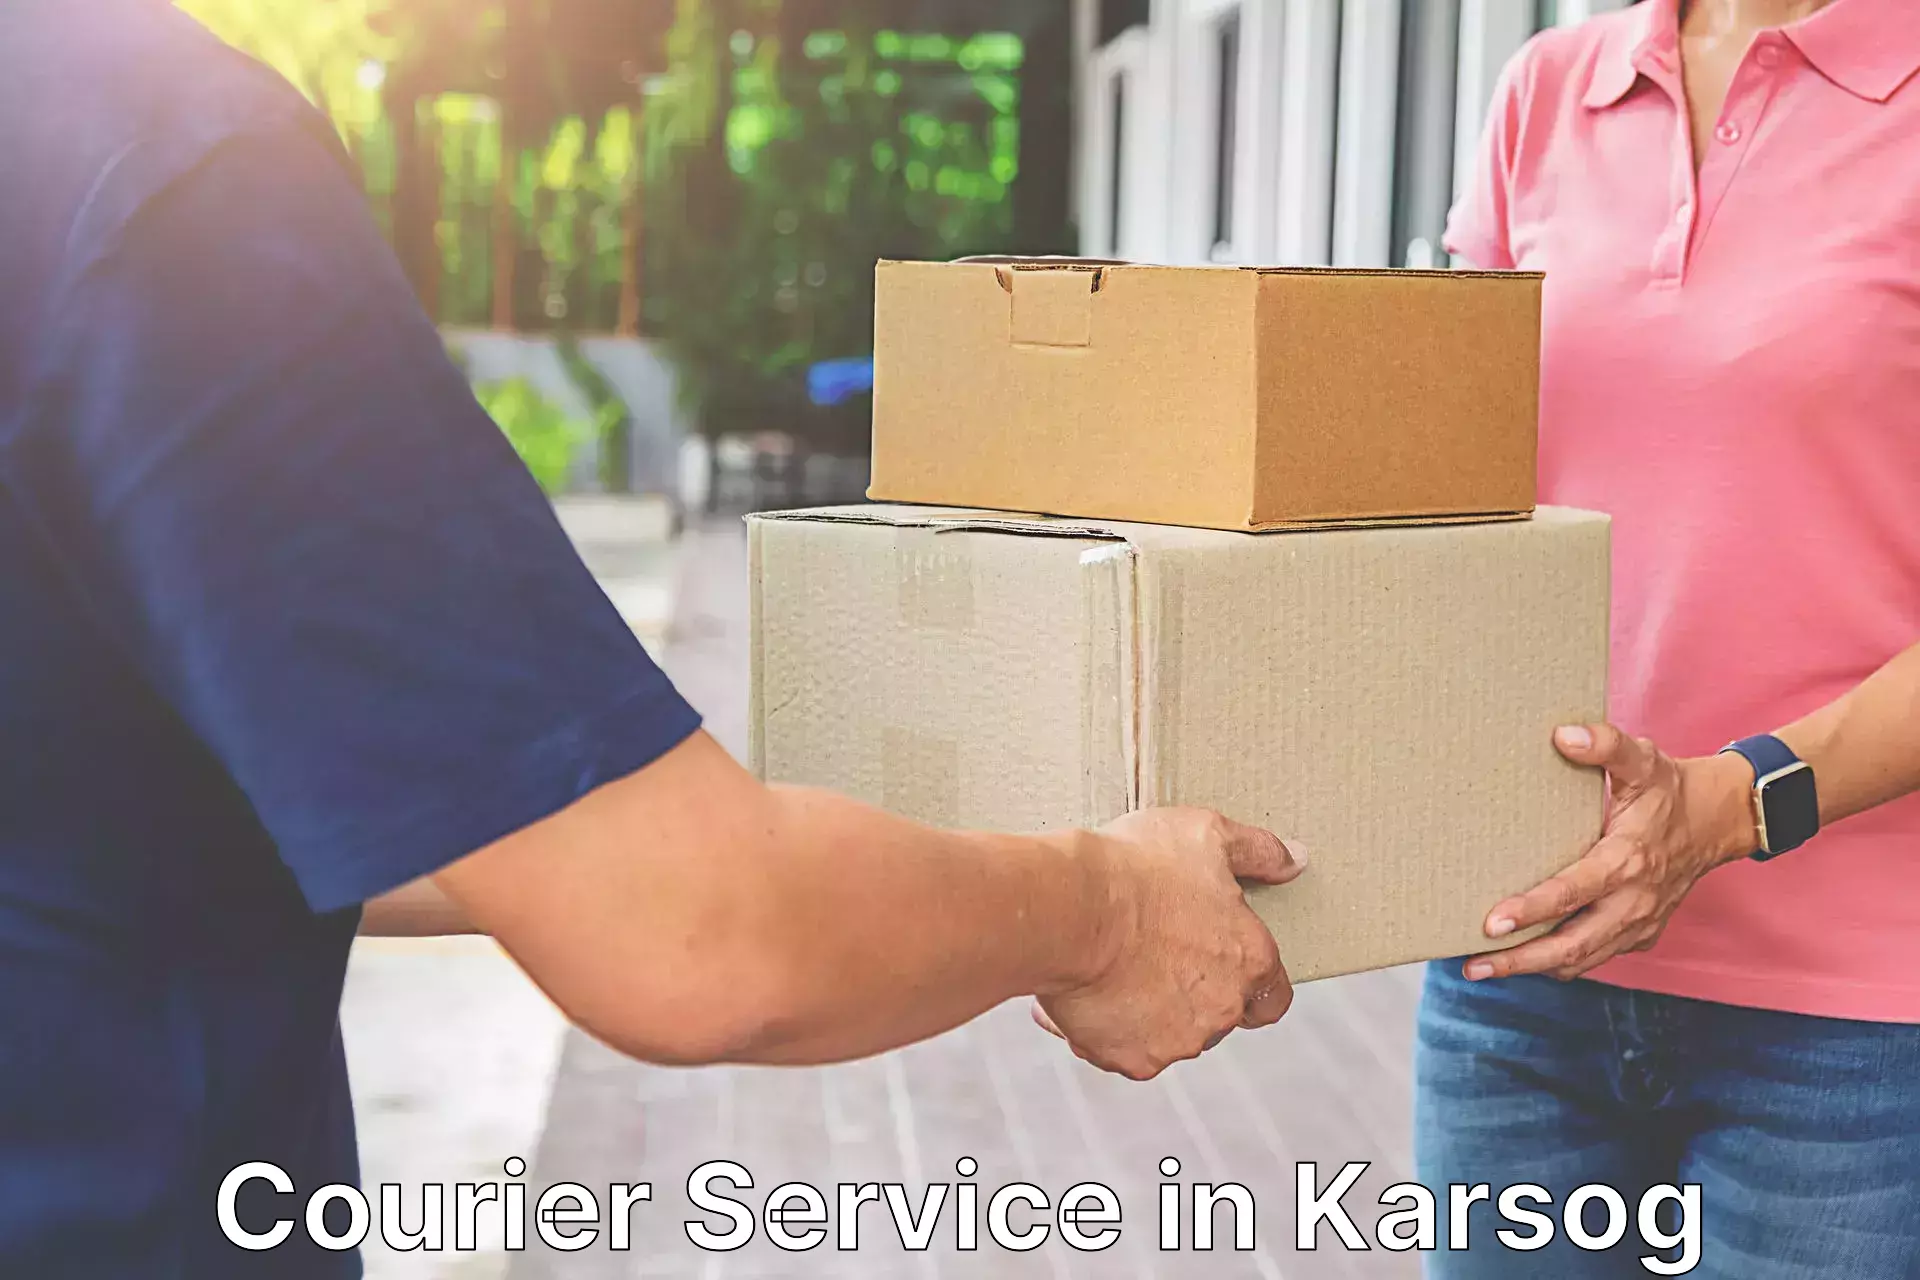 Sustainable shipping practices in Karsog